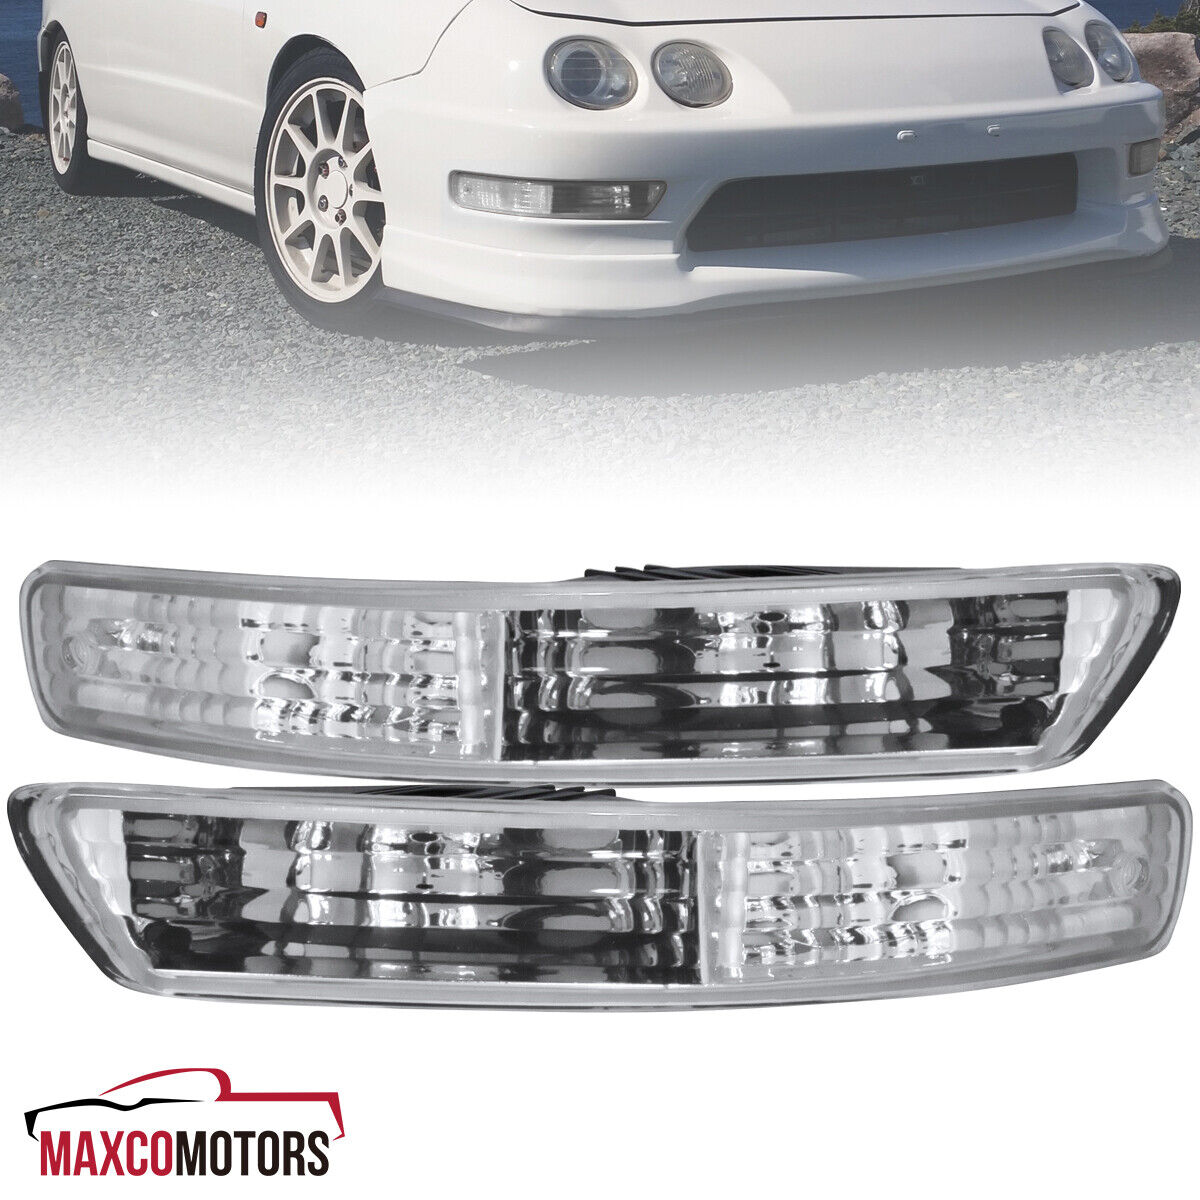 Bumper Lights Fits 1998-2001 Acura Integra Clear Parking Signal Lamps Left+Right